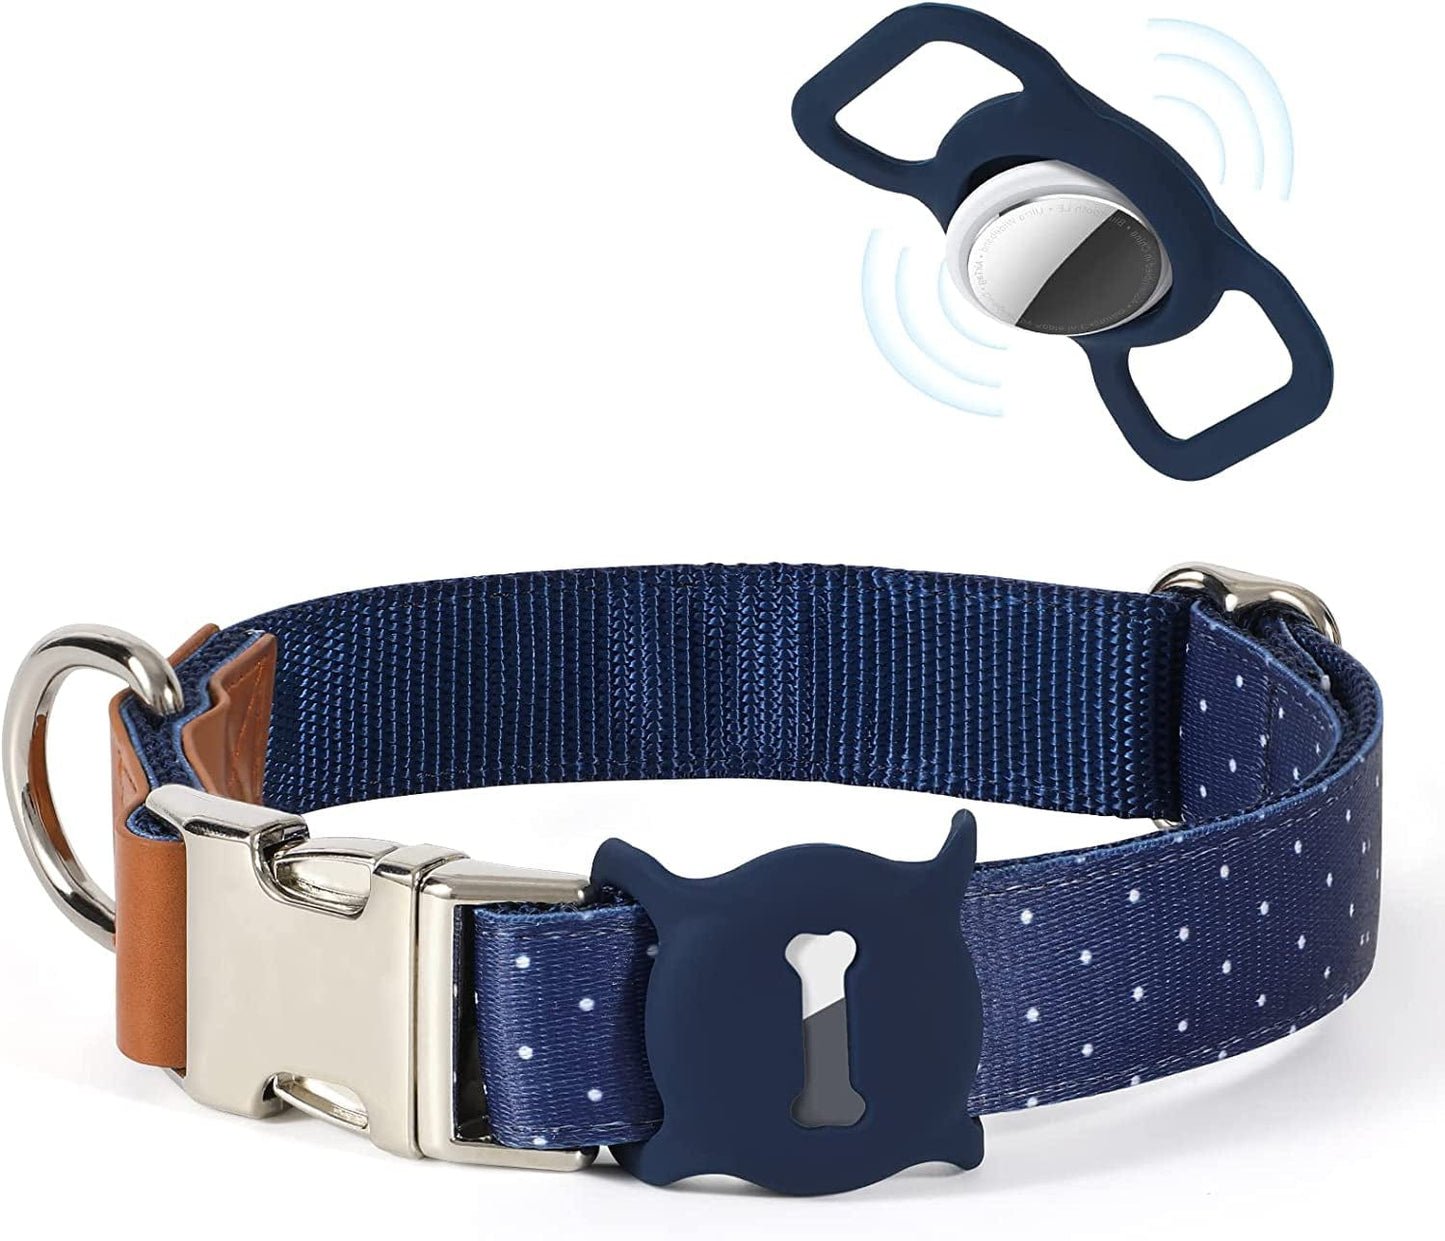 WHIPPY Airtag Dog Collar Adjustable Apple Air Tag Accessories Dog Collar Heavy Duty Metal Buckle Floral Dog Collar with Airtag Holder Case for Small Medium Large Dog Pet,M,Green Electronics > GPS Accessories > GPS Cases WHIPPY D-Navy Blue+AirTag Case M: 14"-21" 